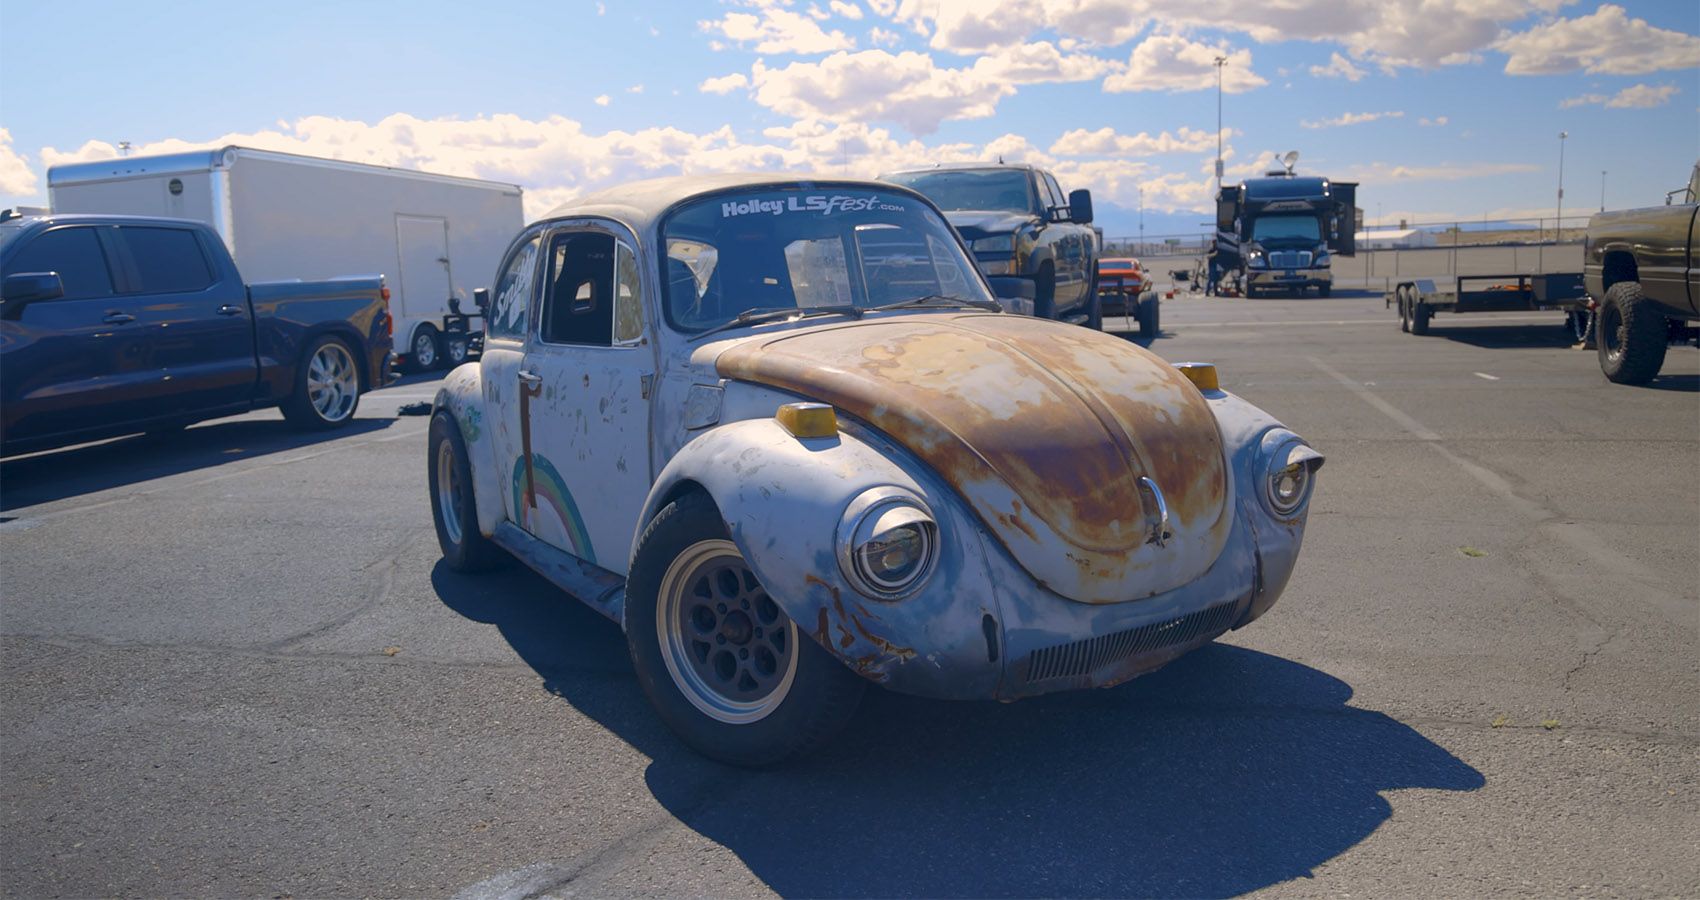 Duncan Smith’s “Project Gray Matter” 1973 VW Super Beetle Only Looks Like A Battered Old Bug